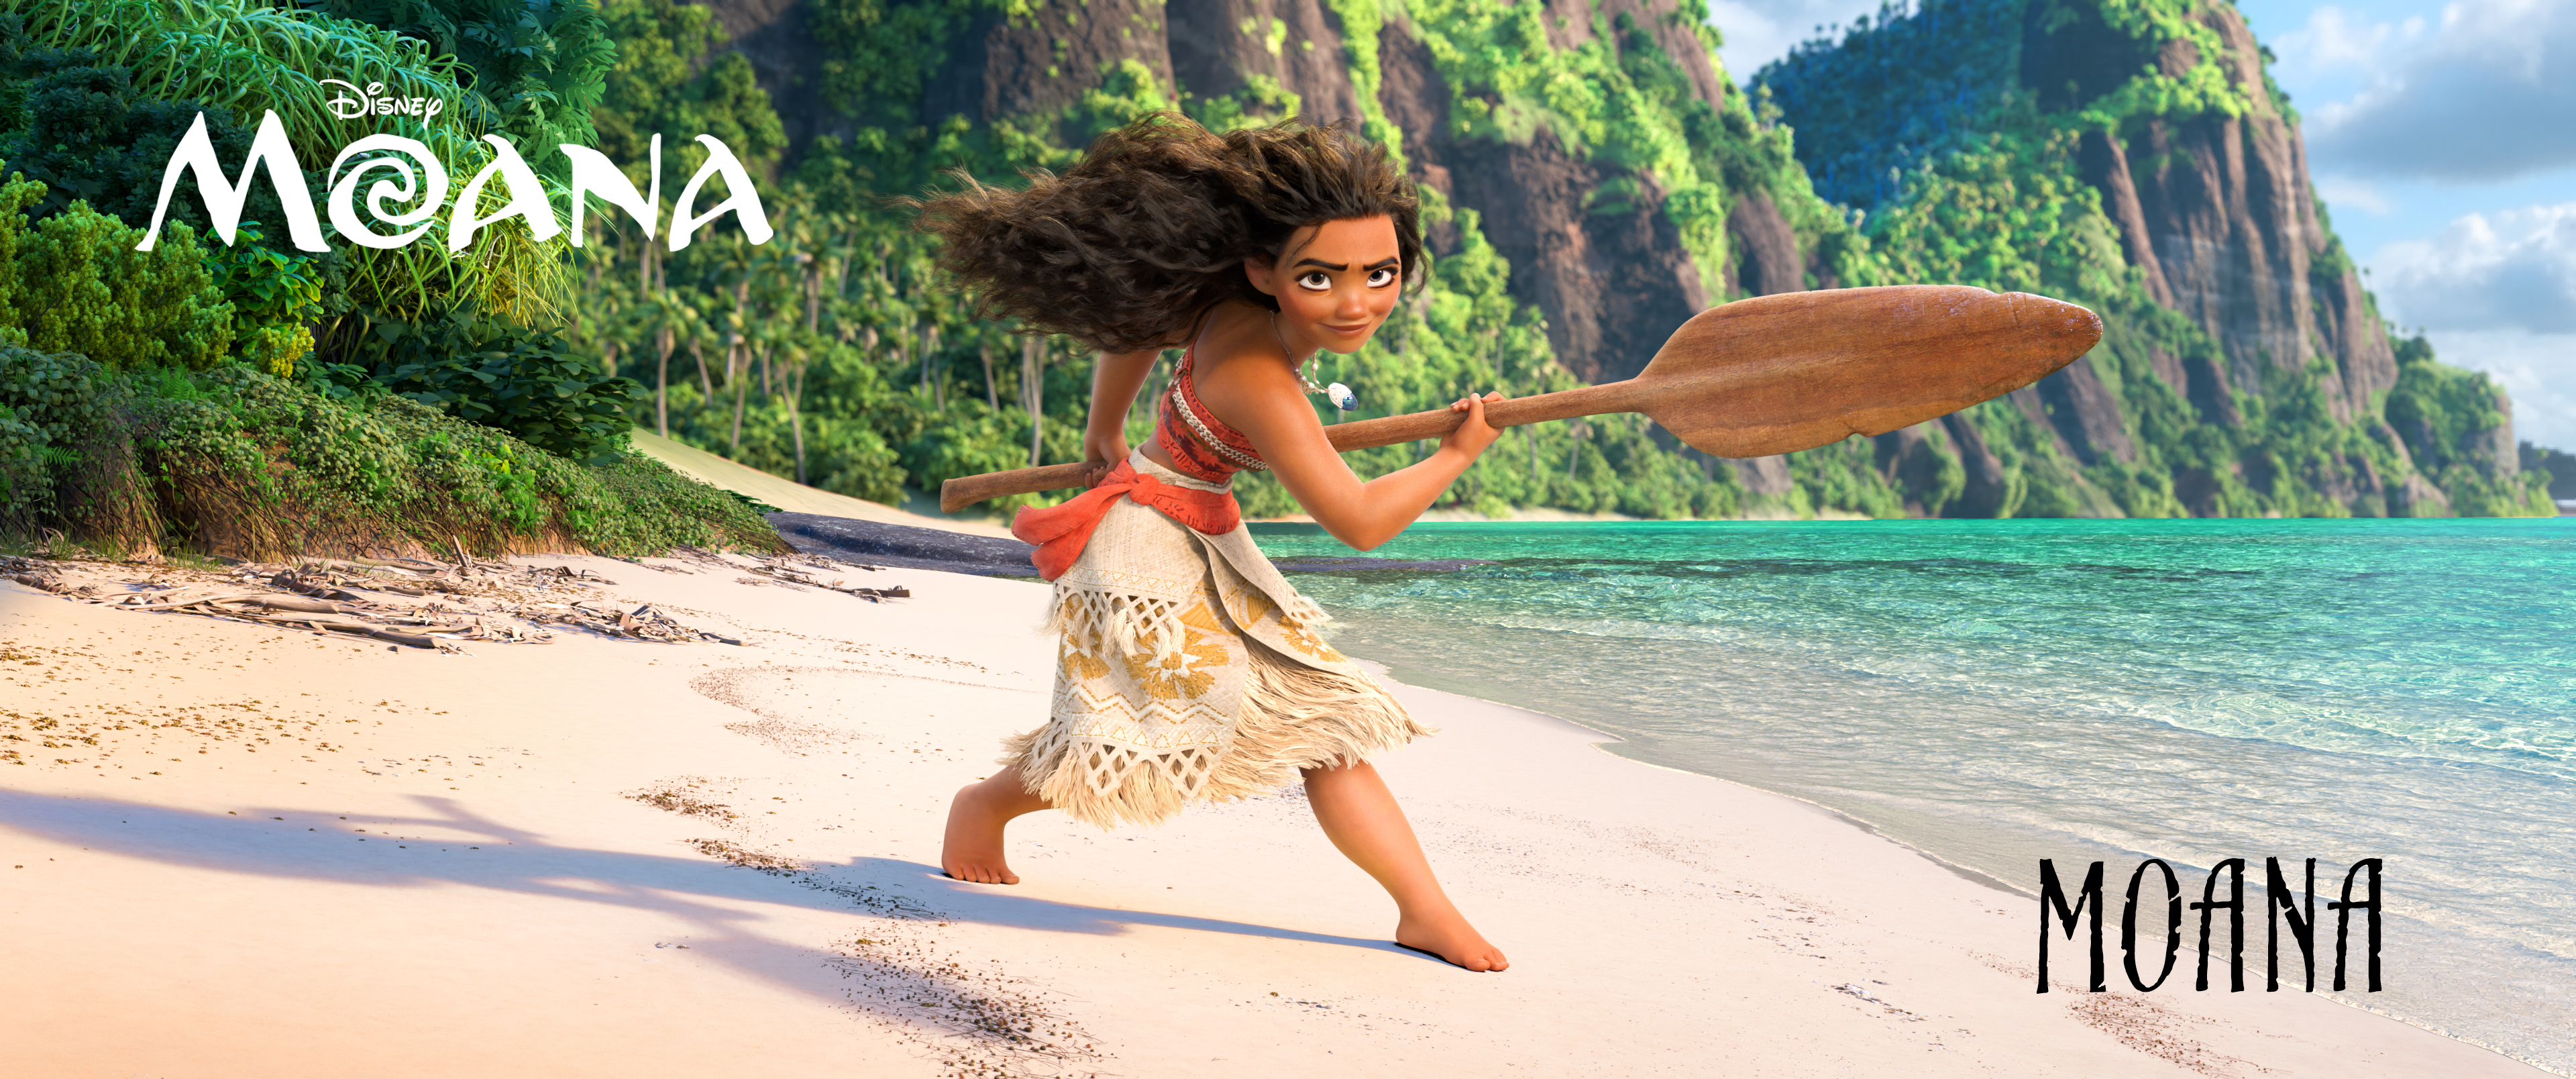 Meet the New Characters (and their Voices) From Moana